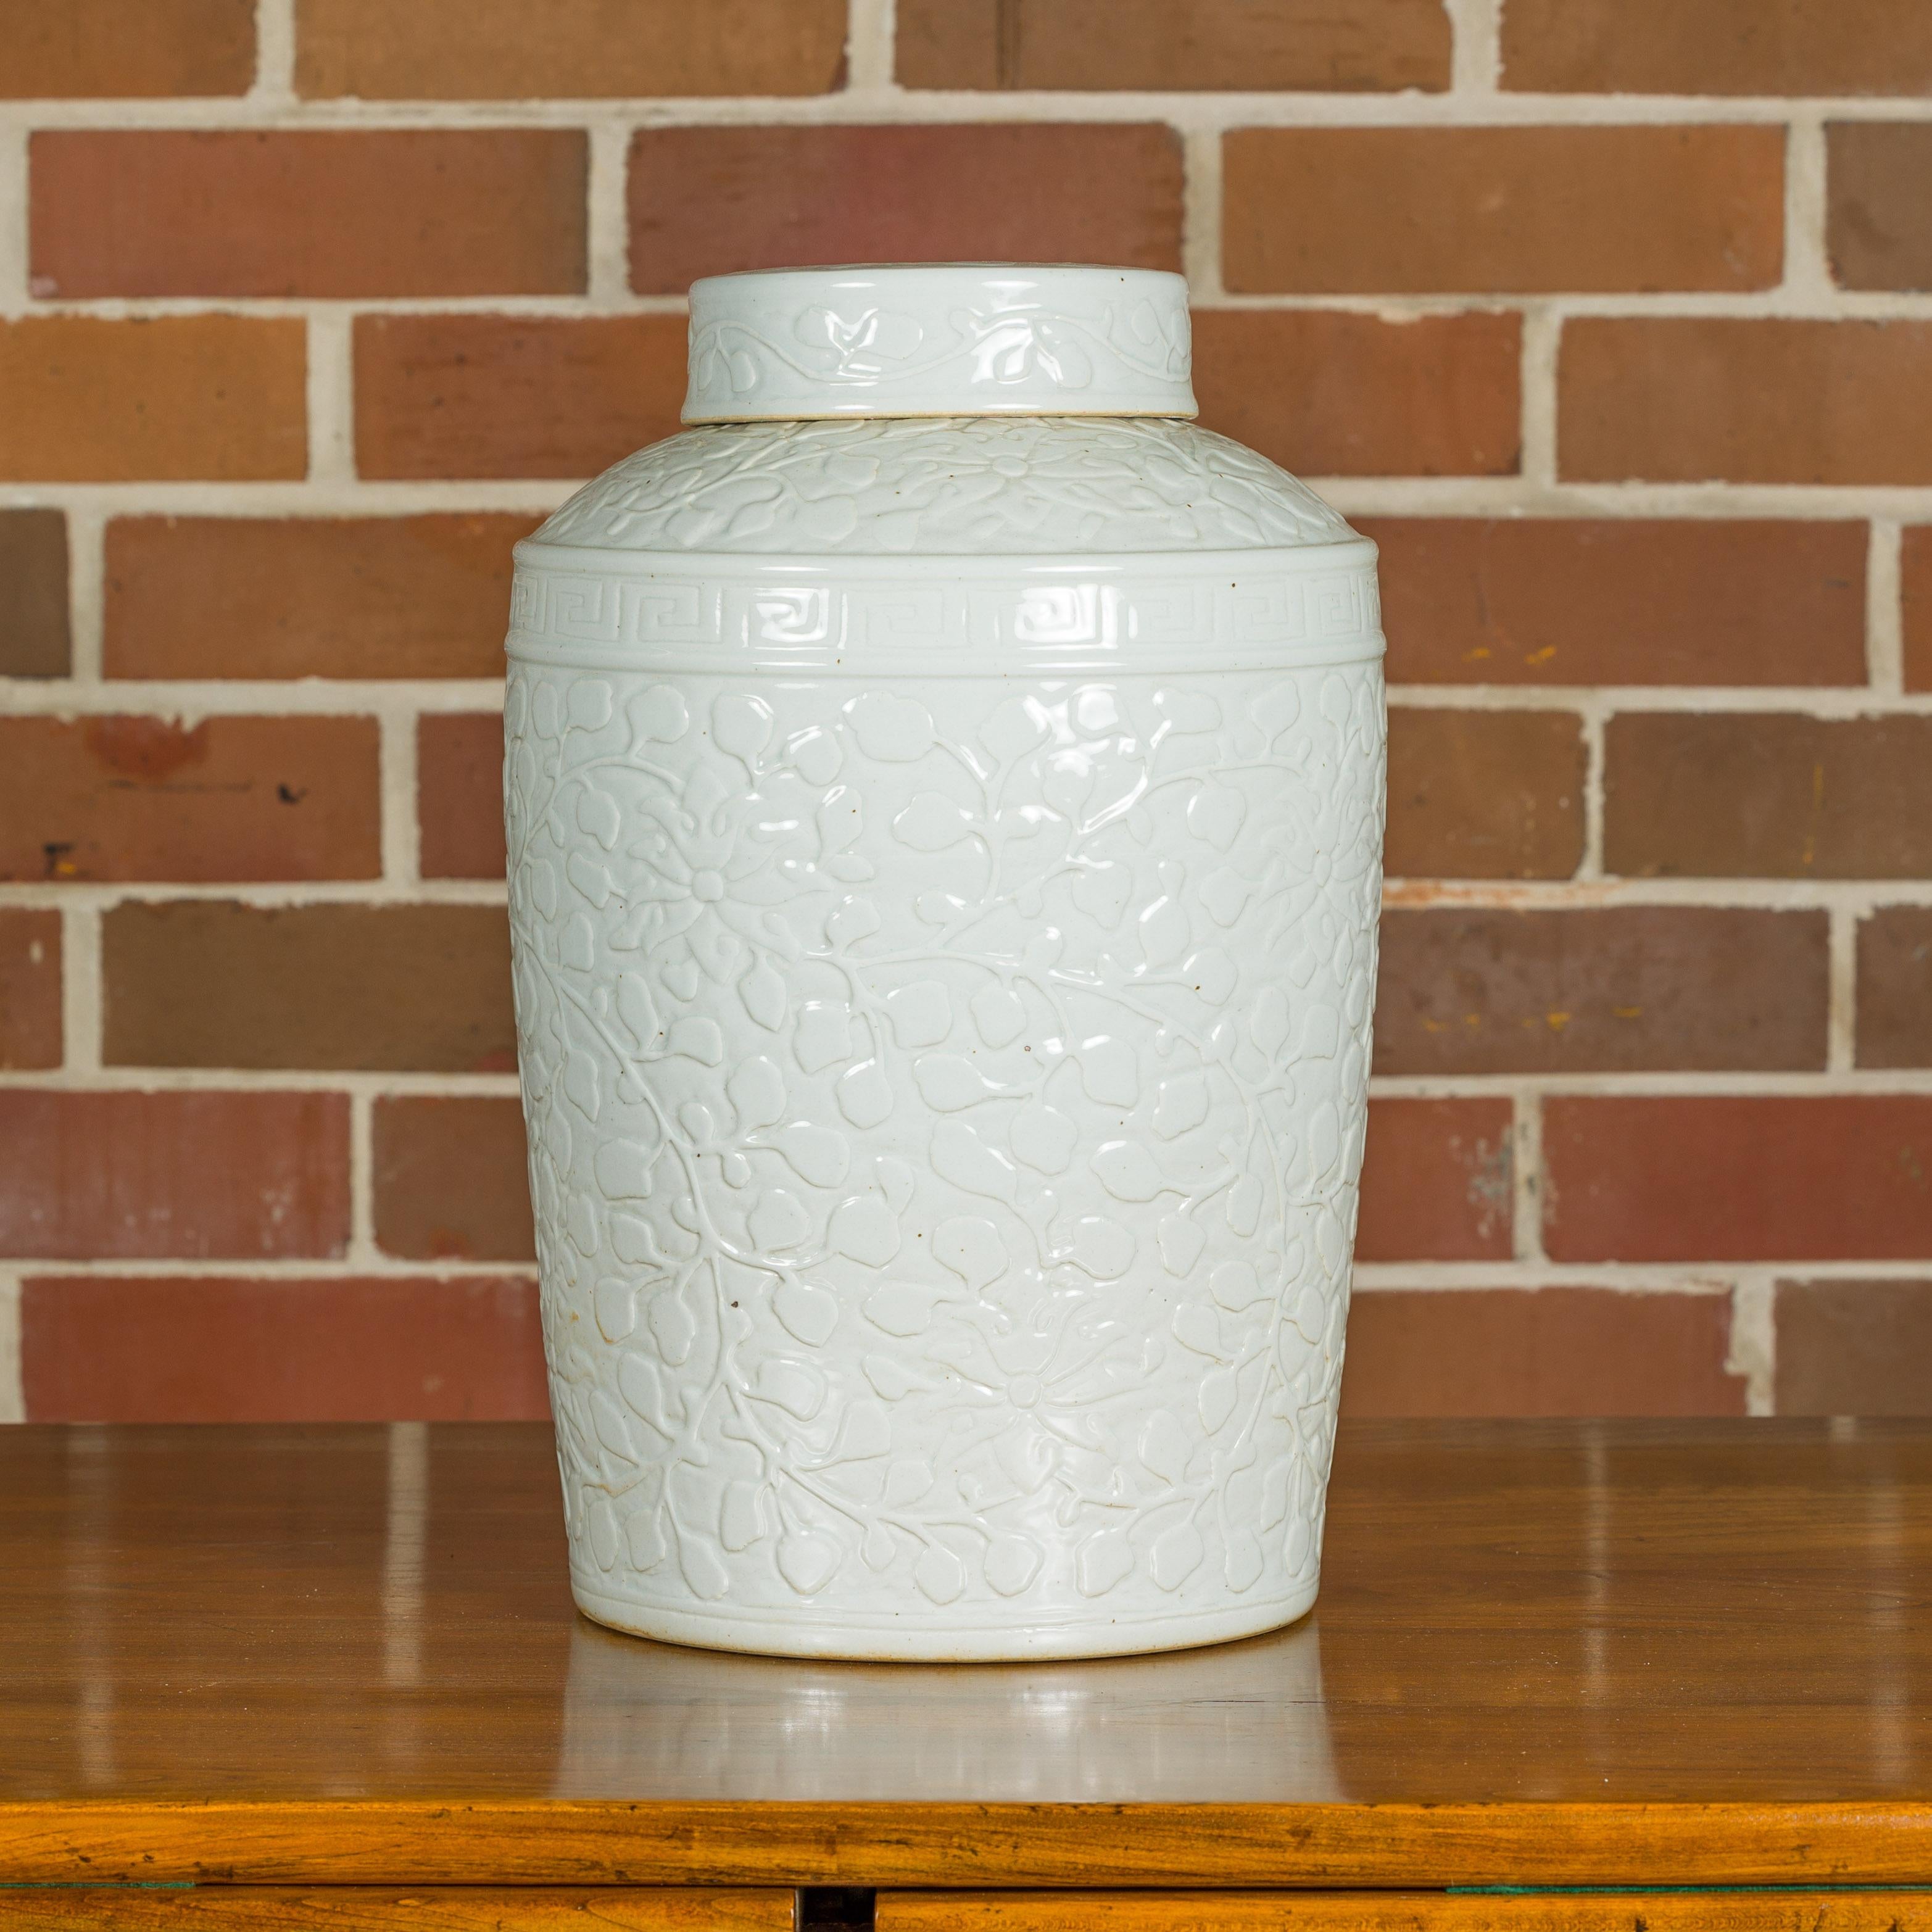 A white porcelain Asian lidded jar with scrolling foliage motifs and slightly tapering lines. This exquisite white porcelain Asian lidded jar is a splendid example of timeless elegance and delicate artistry. The jar features beautifully scrolling